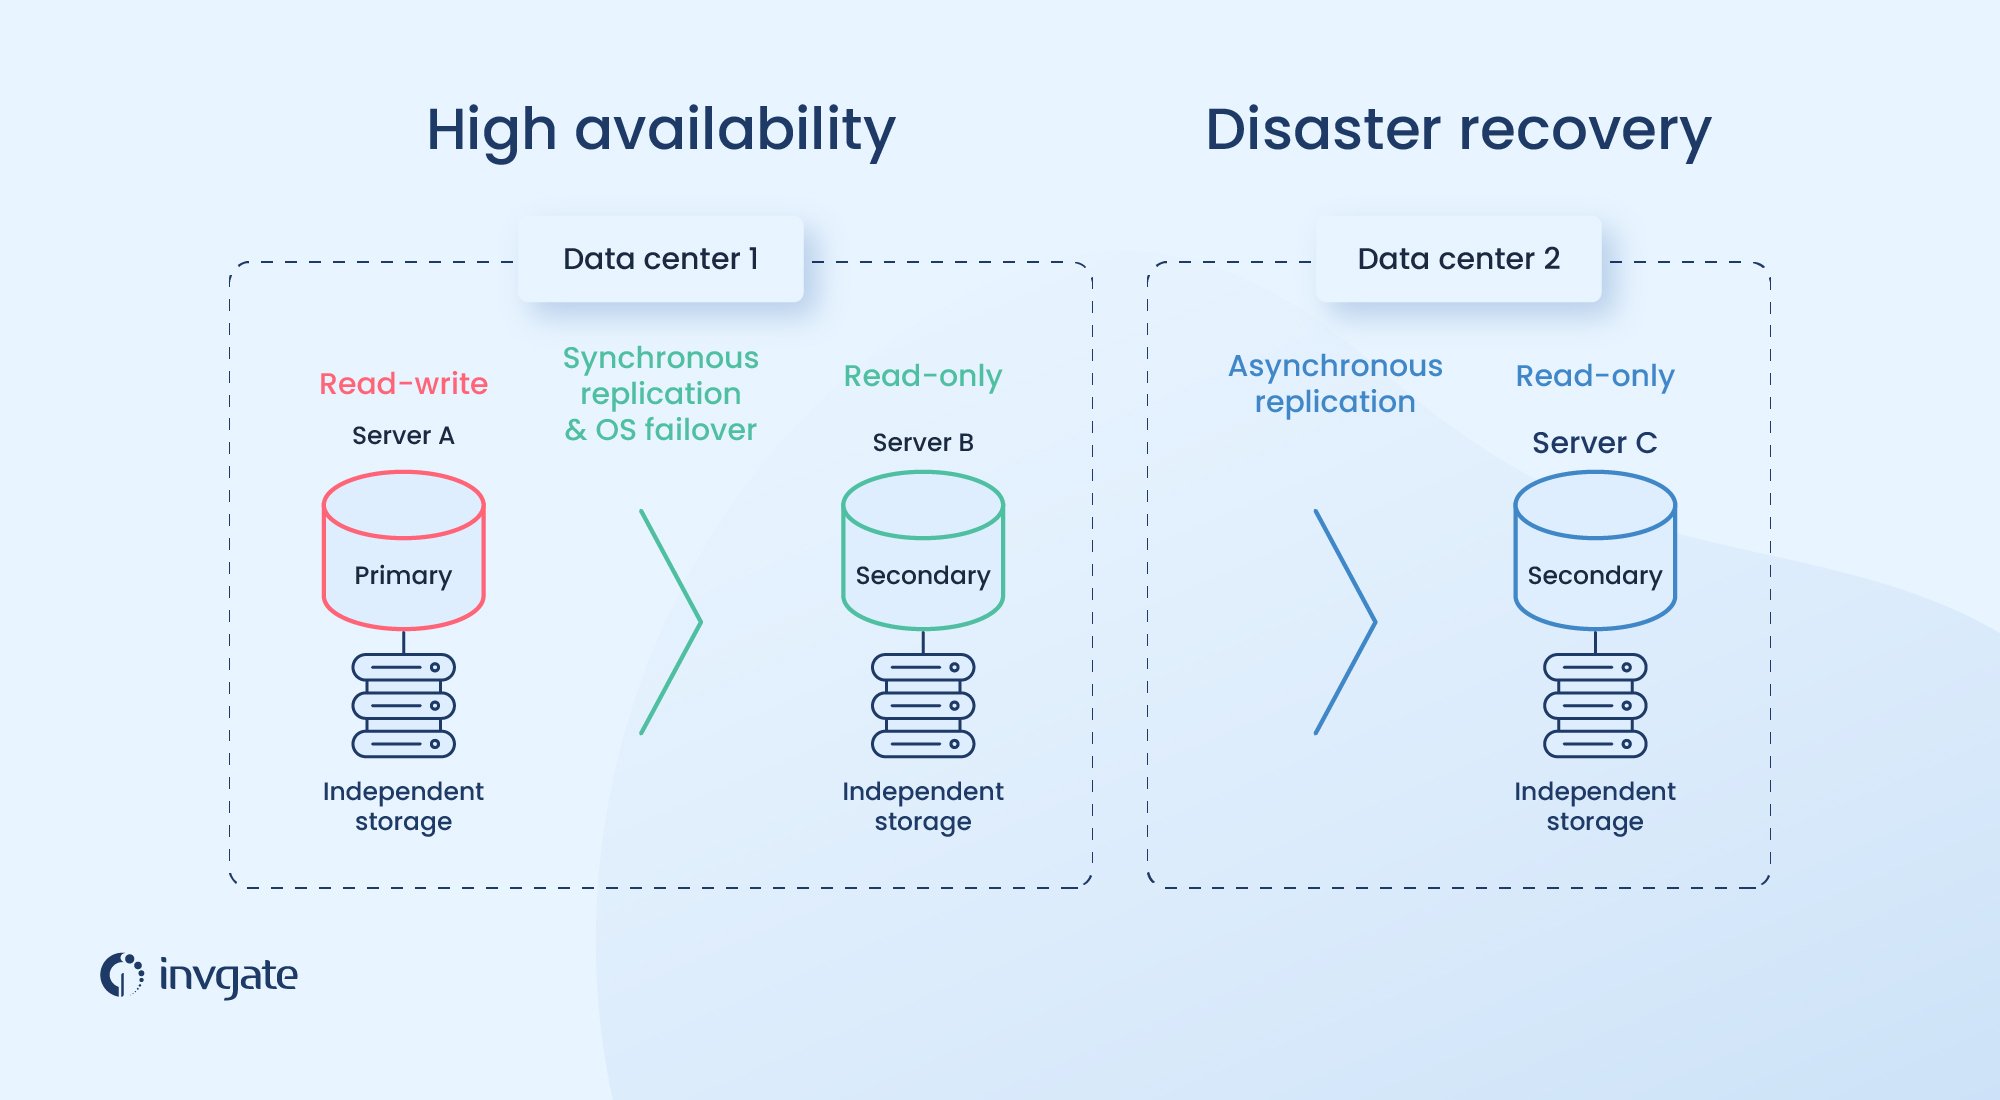 High availability and disaster recovery